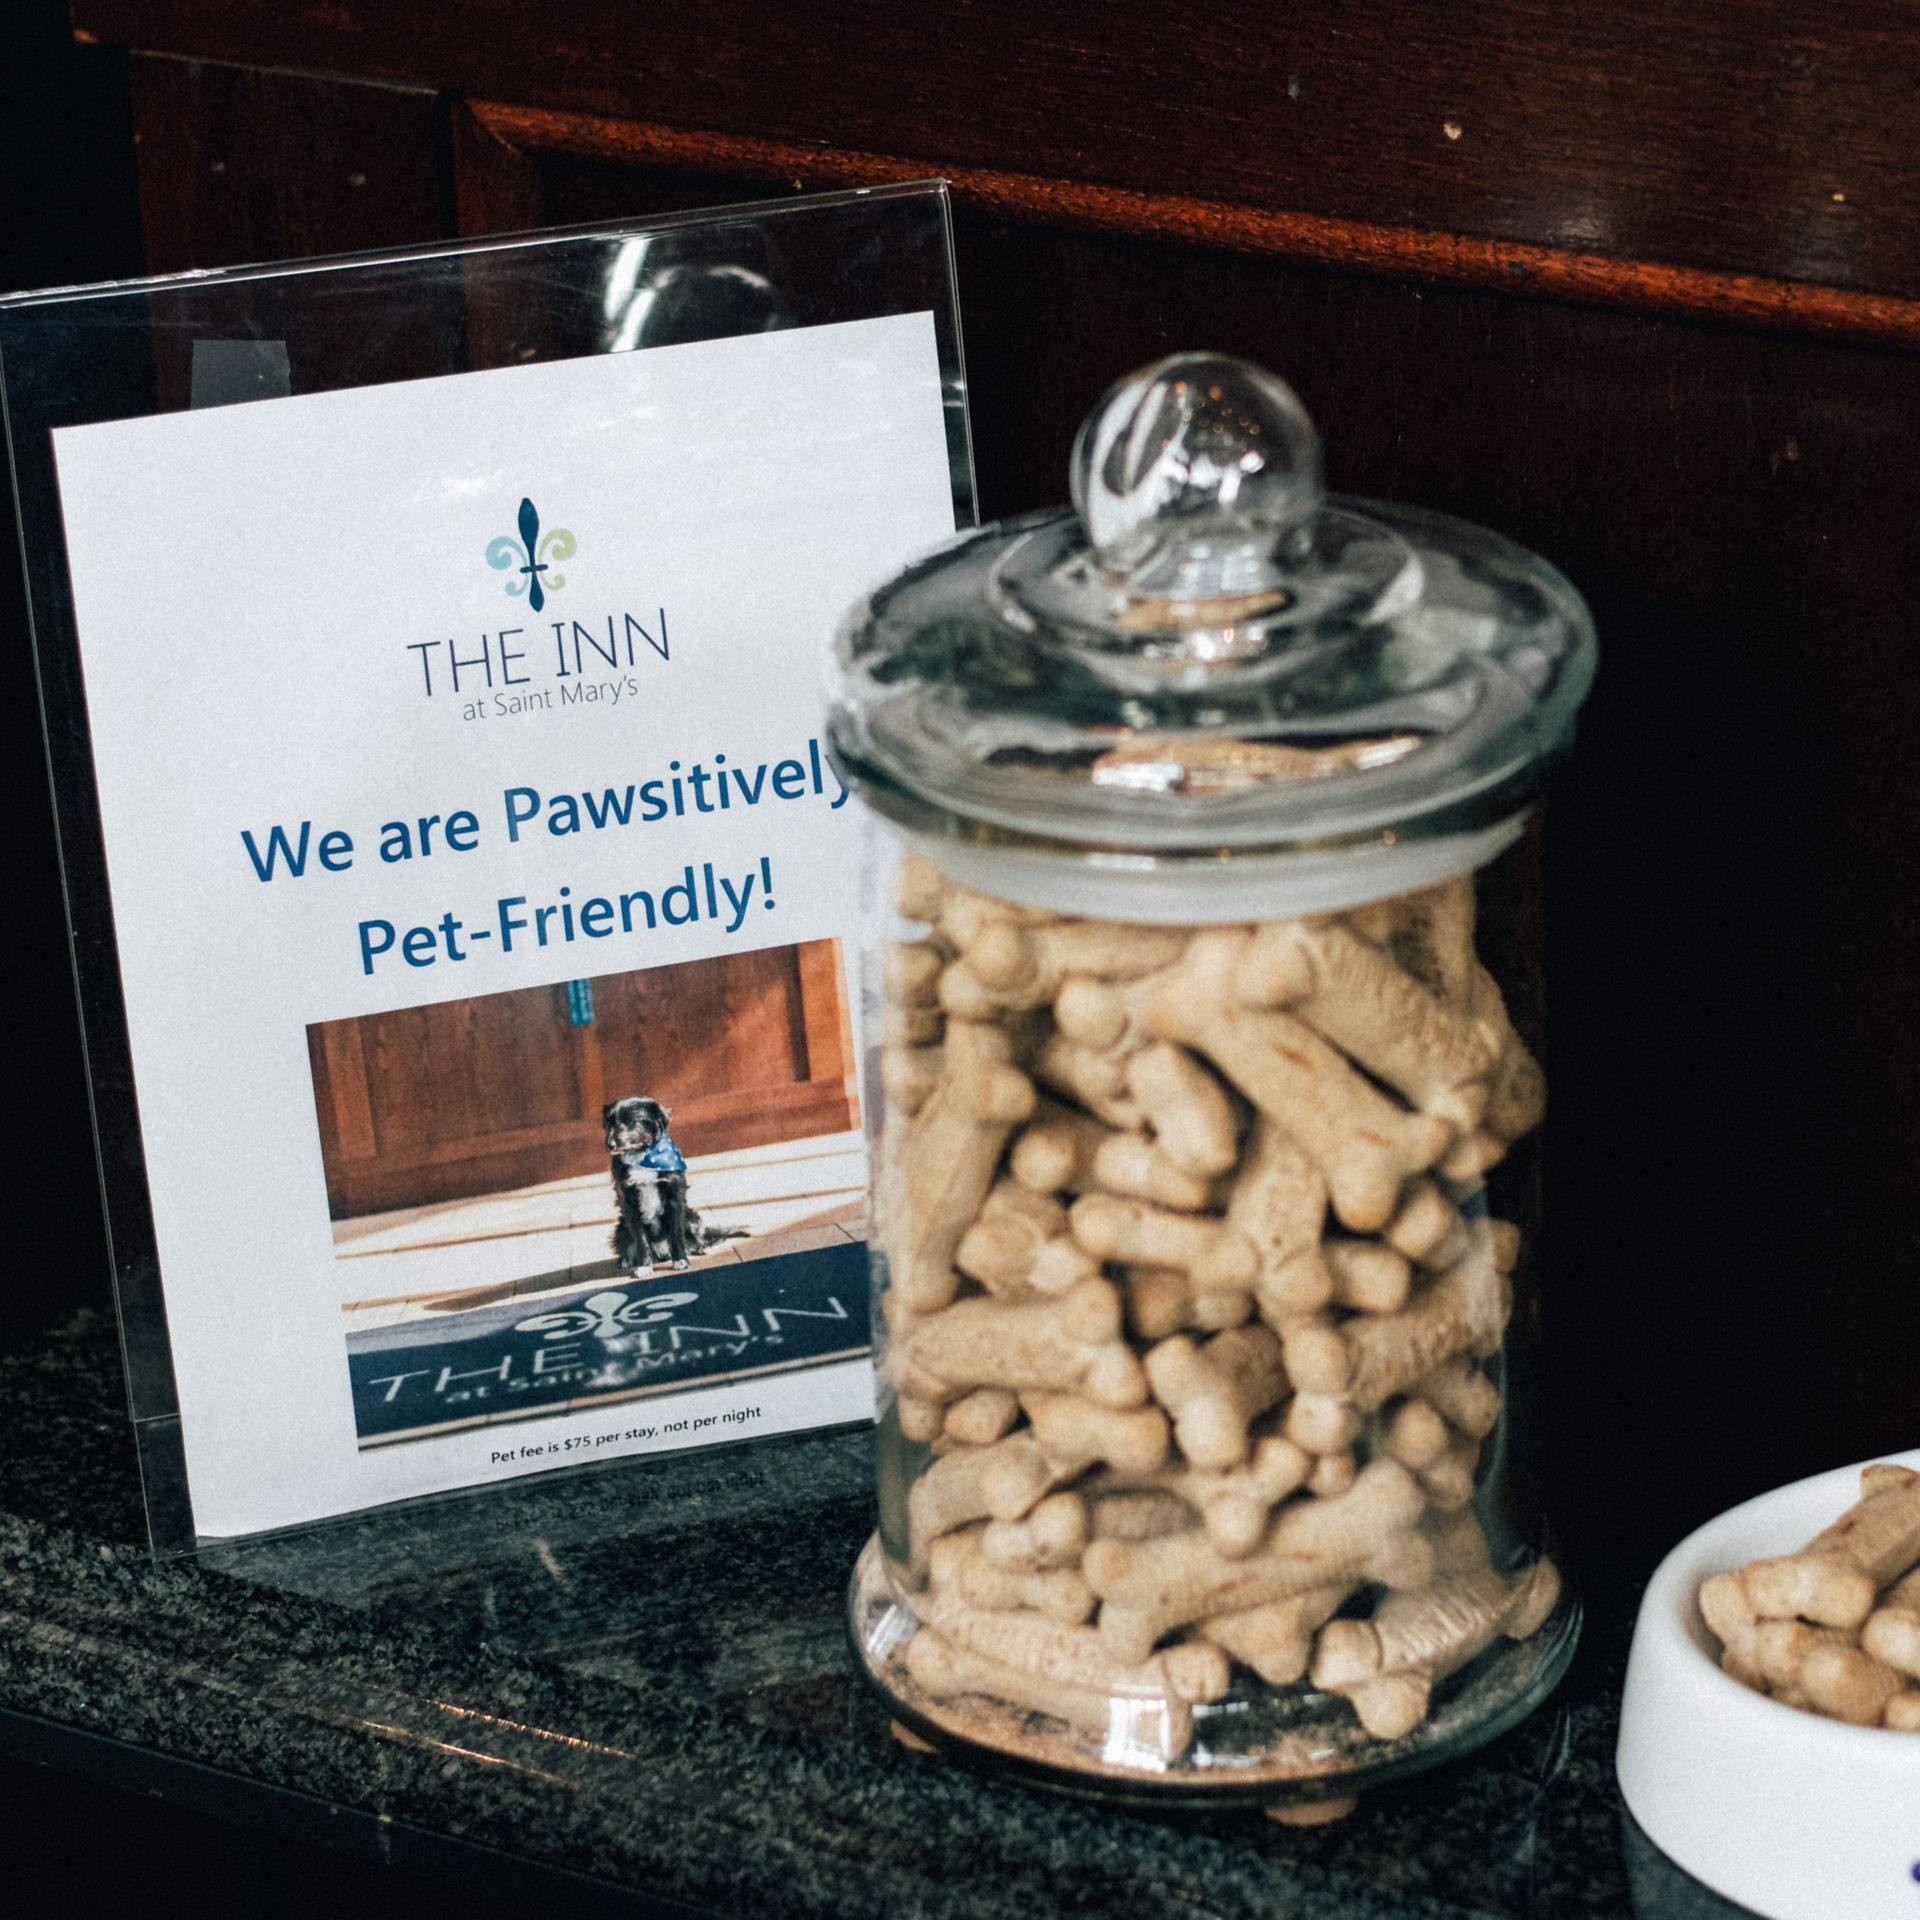 Pet Friendly Inn at Saint Mary's in South Bend, Indiana